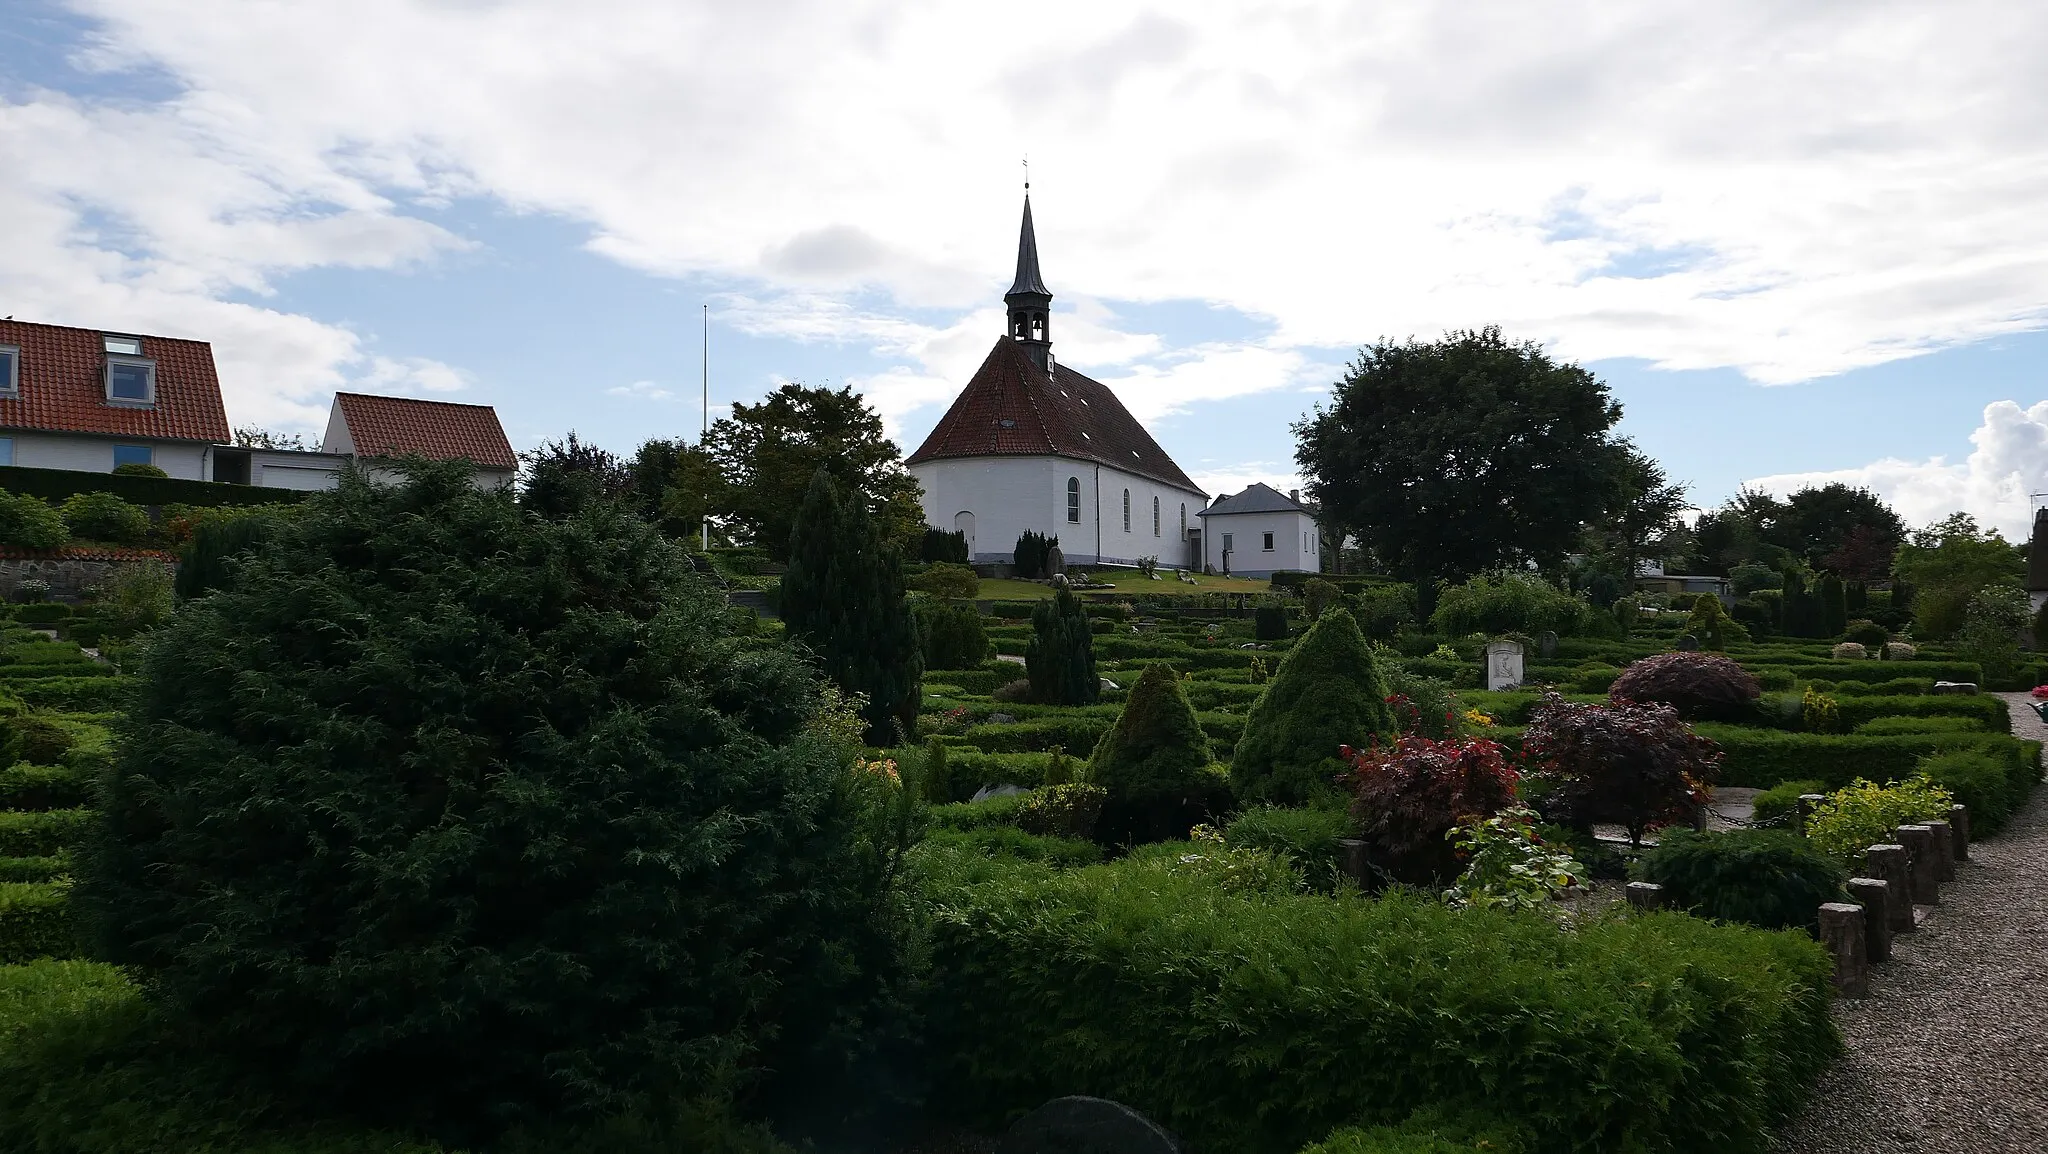 Photo showing: The Old Cemetery of Gilleleje, a harbour town which is part of the Gribskov Municipality in the Capital Region of Denmark. It is located at the northernmost point of Sjælland, the largest and most populous island in Denmark proper.